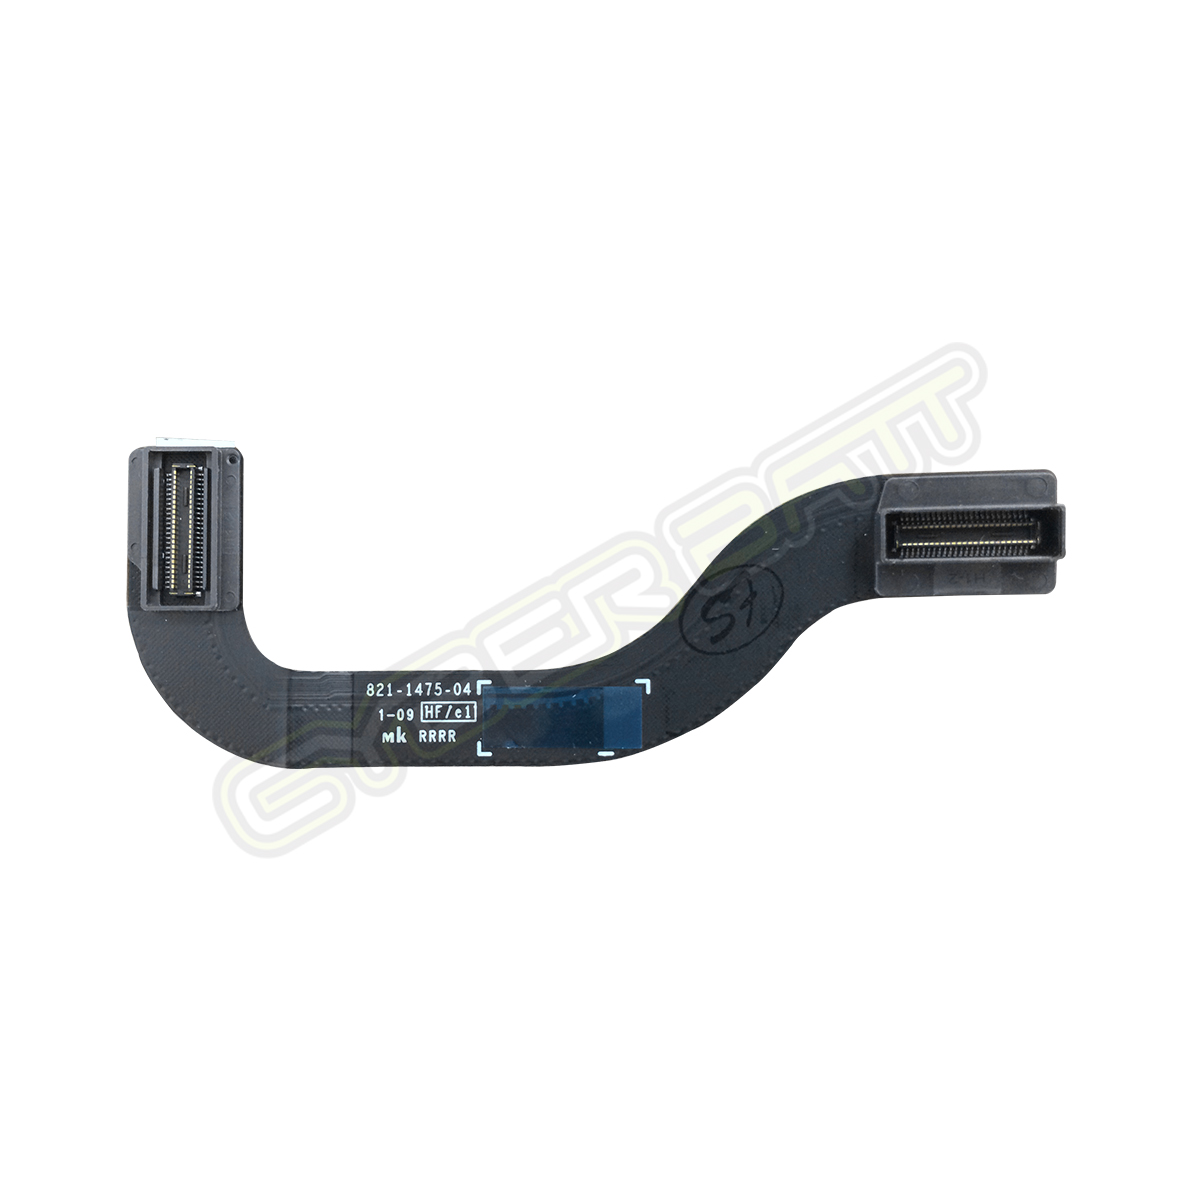 Power Audio Board Cable Macbook Air 11 inch A1465 (Mid-2012)  821-1475-A